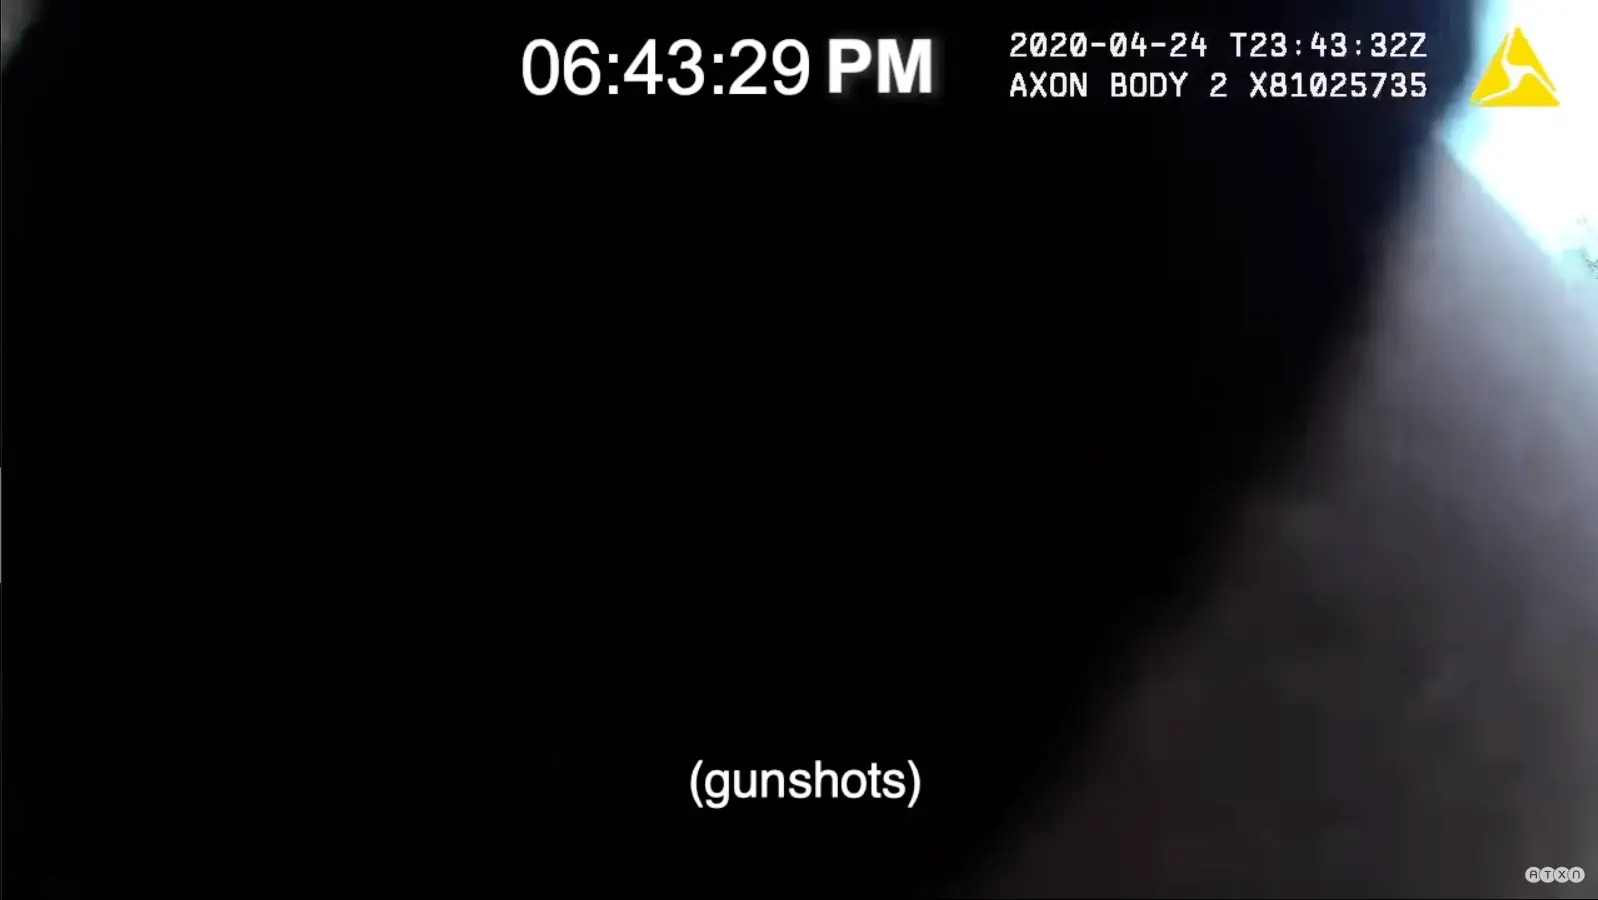 Closed-captioning saying "gunshots" displays over a darkened image that appears to be body-worn camera footage.